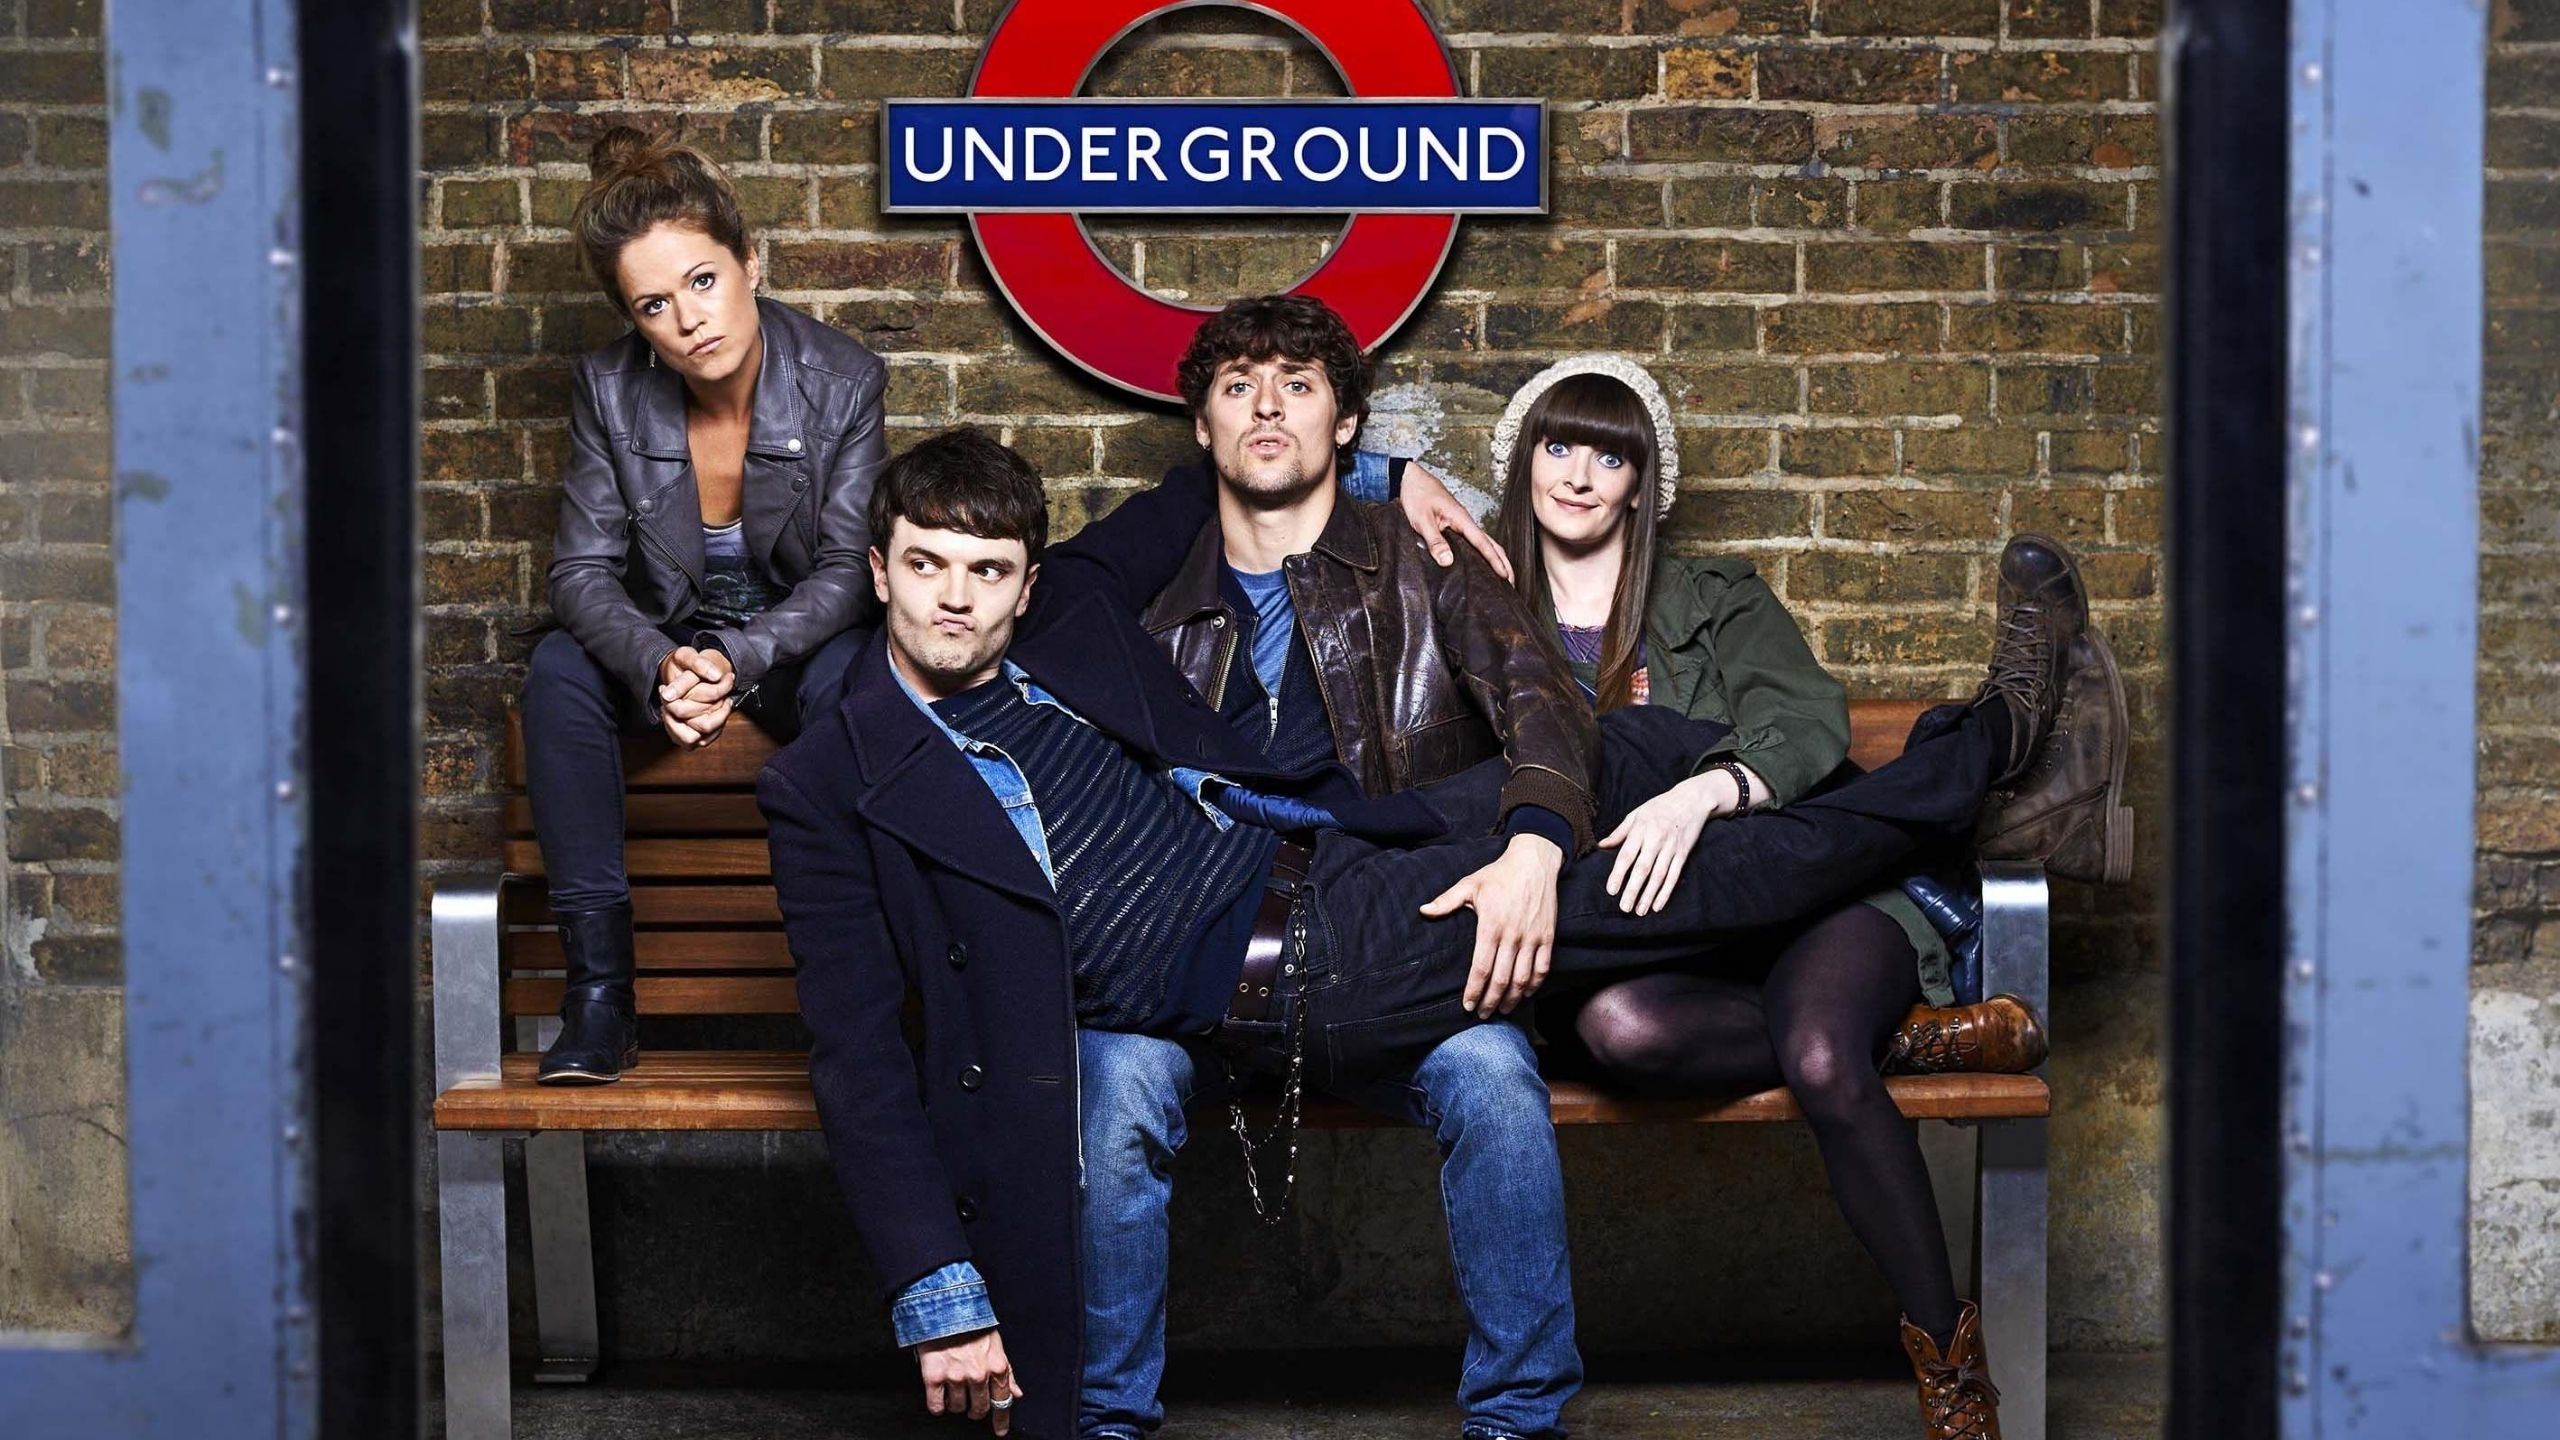 Group of young adults sit looking fed up on a bench in London Underground, one man lays across the legs of the rest of the group